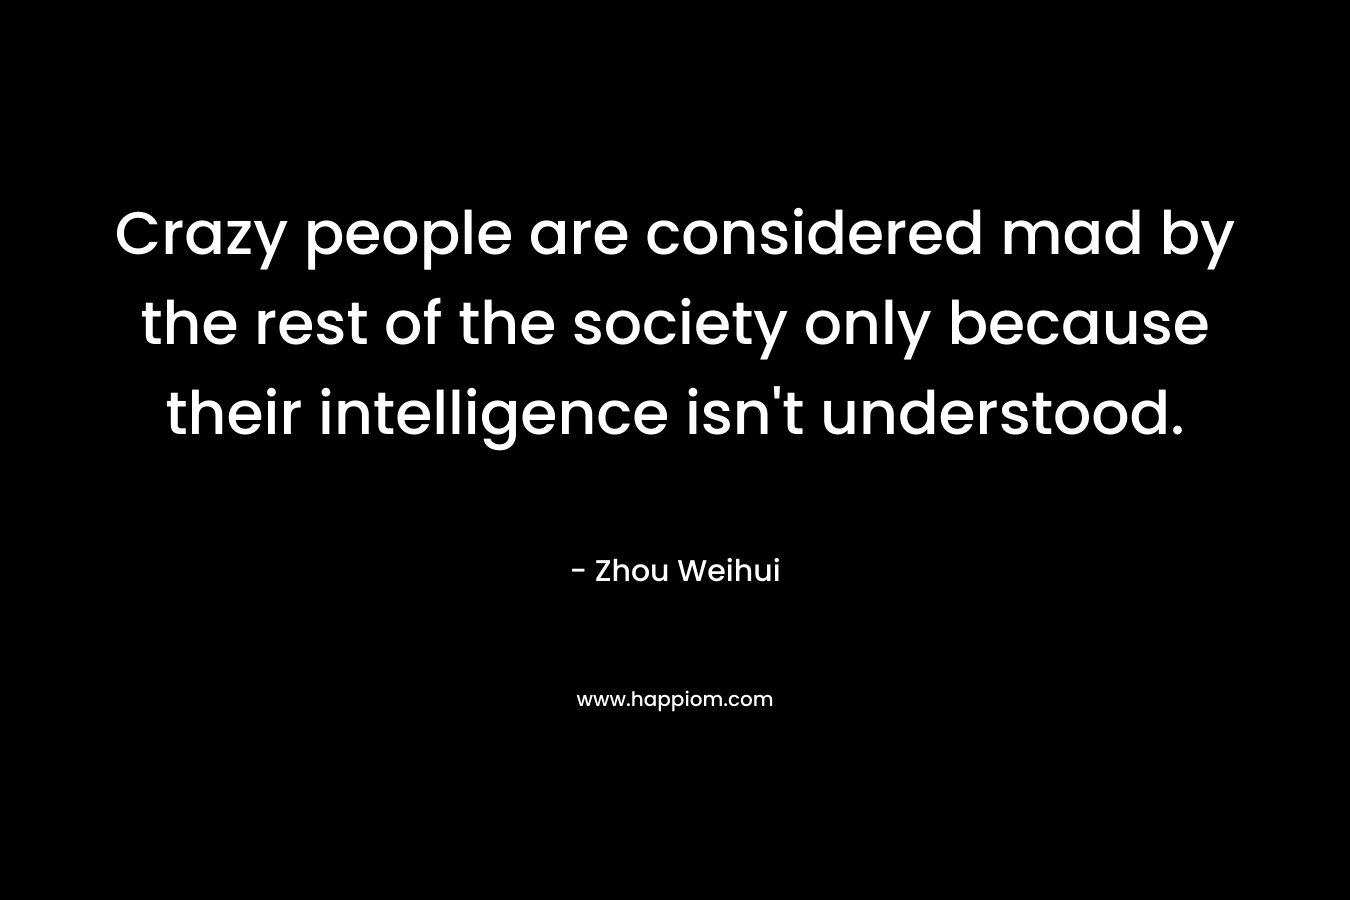 Crazy people are considered mad by the rest of the society only because their intelligence isn't understood.